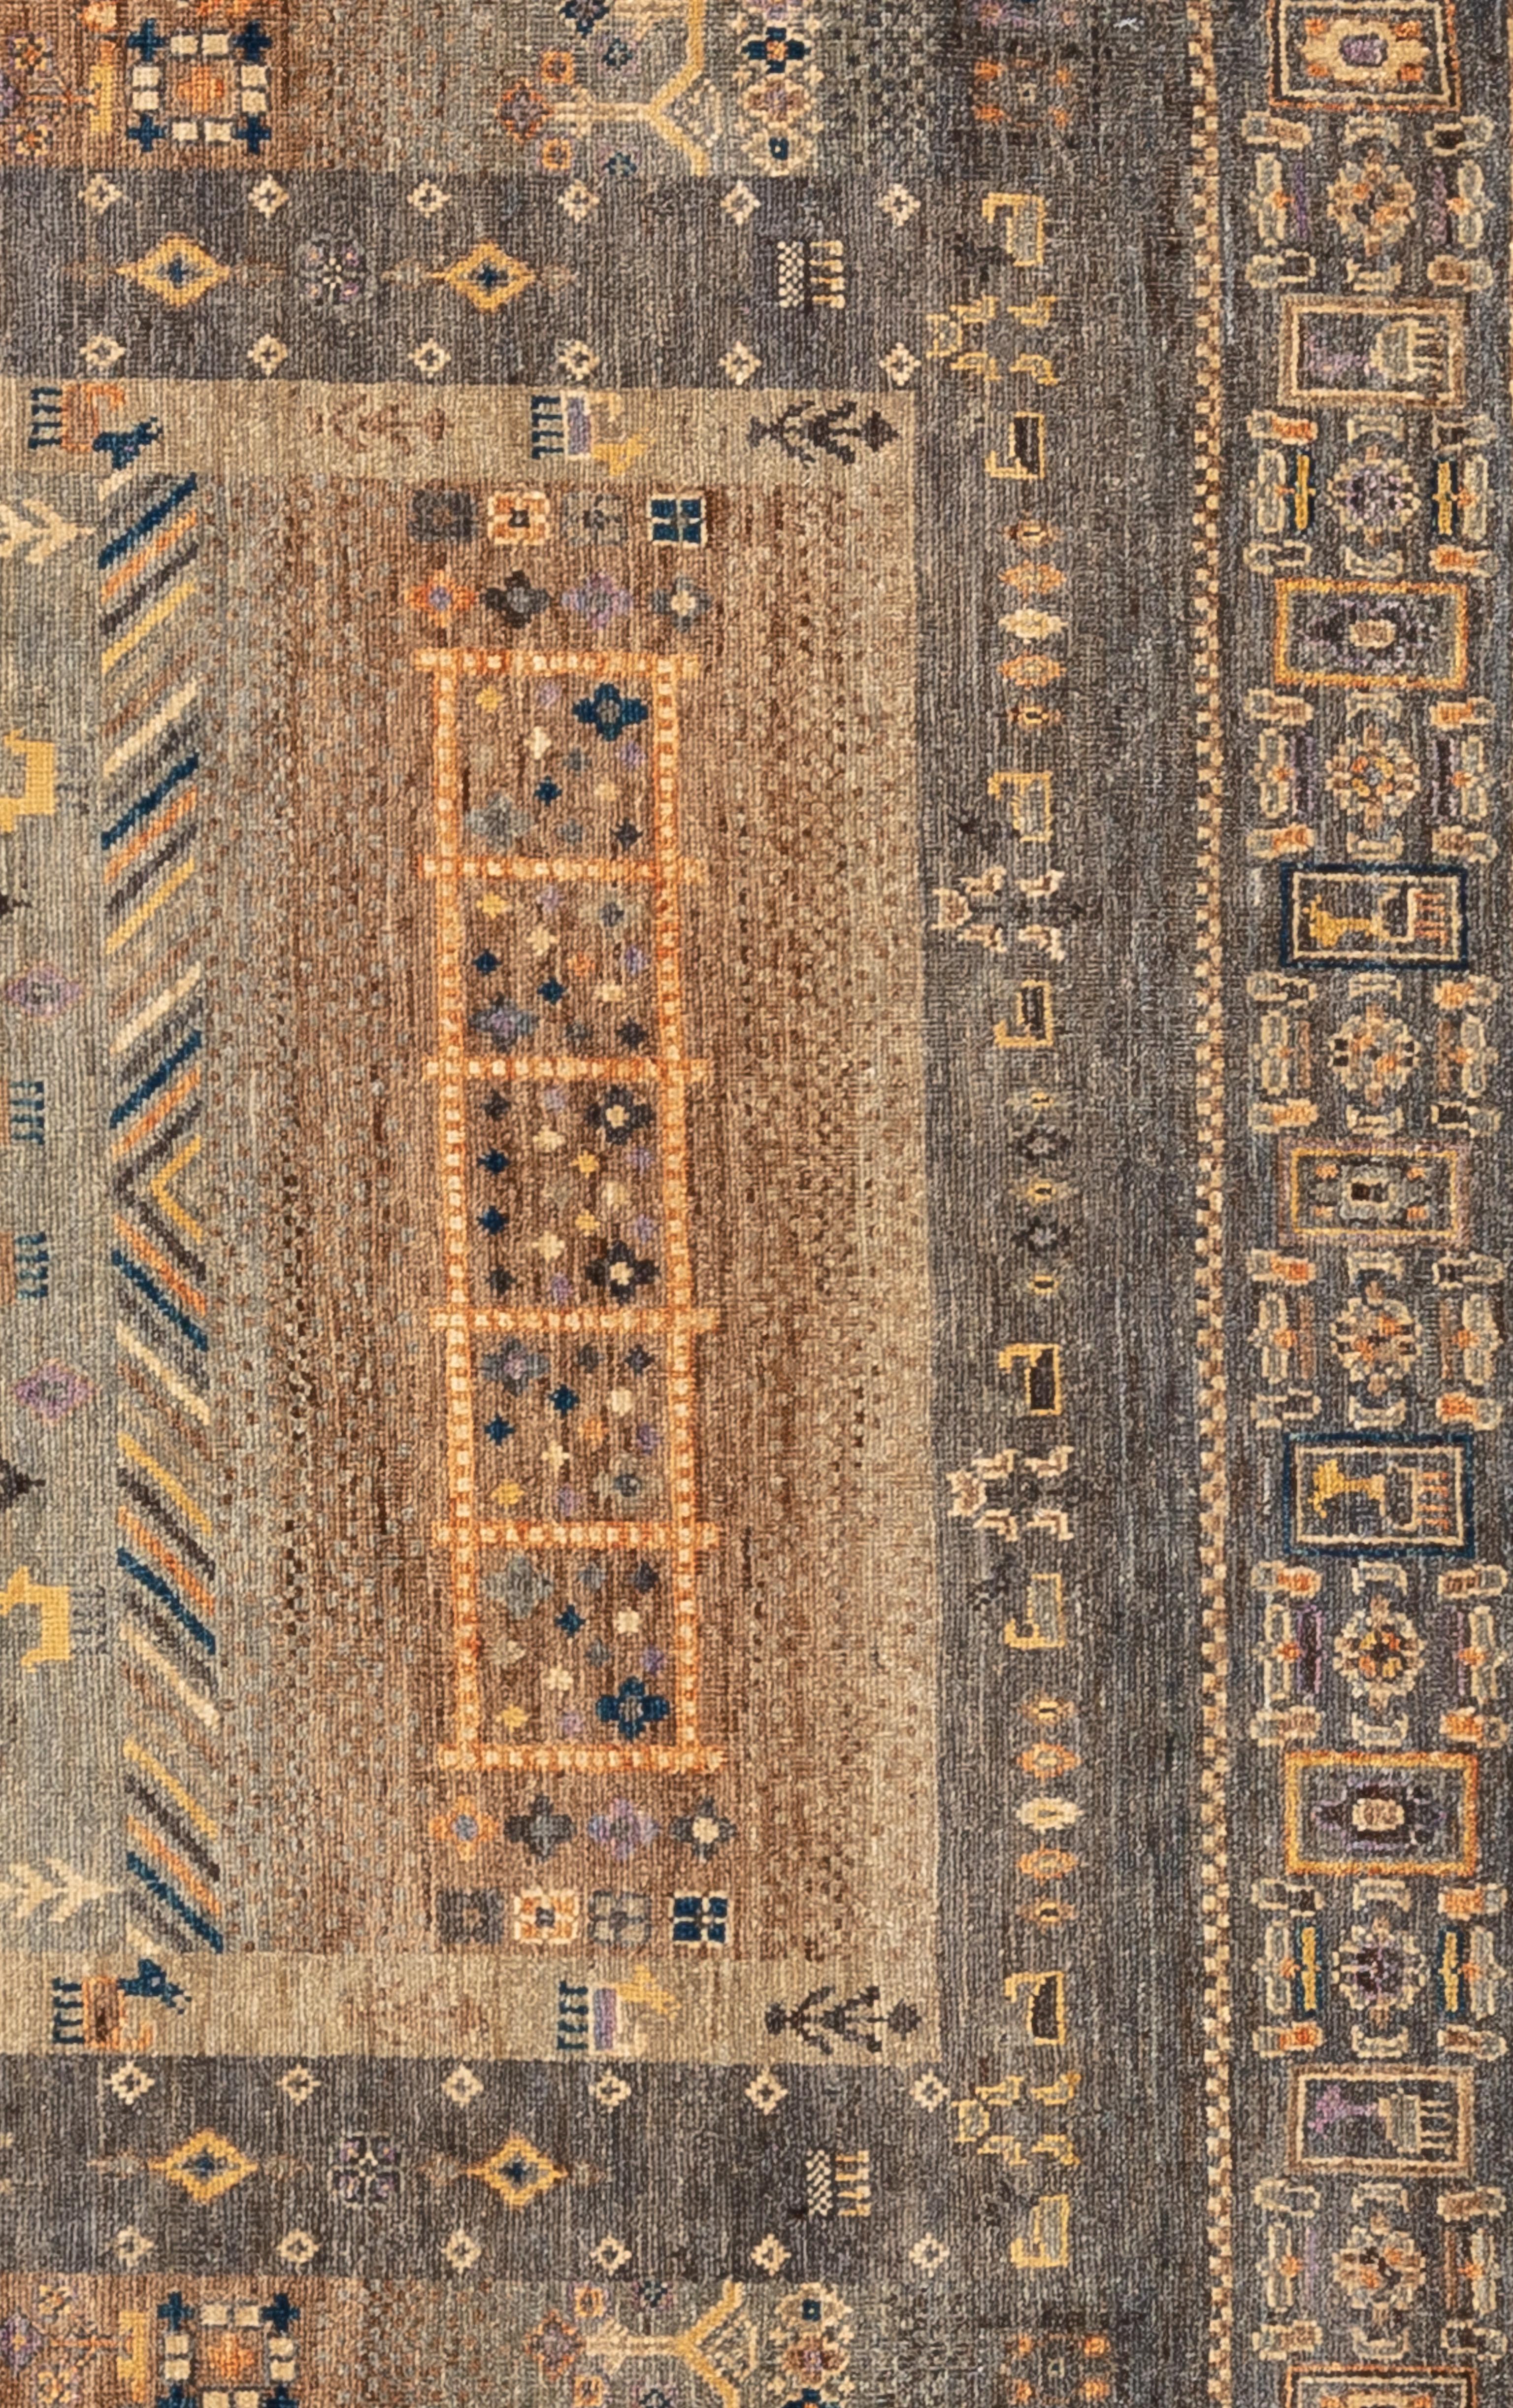 Hand-Woven Tribal Rug with Gabbeh Elements